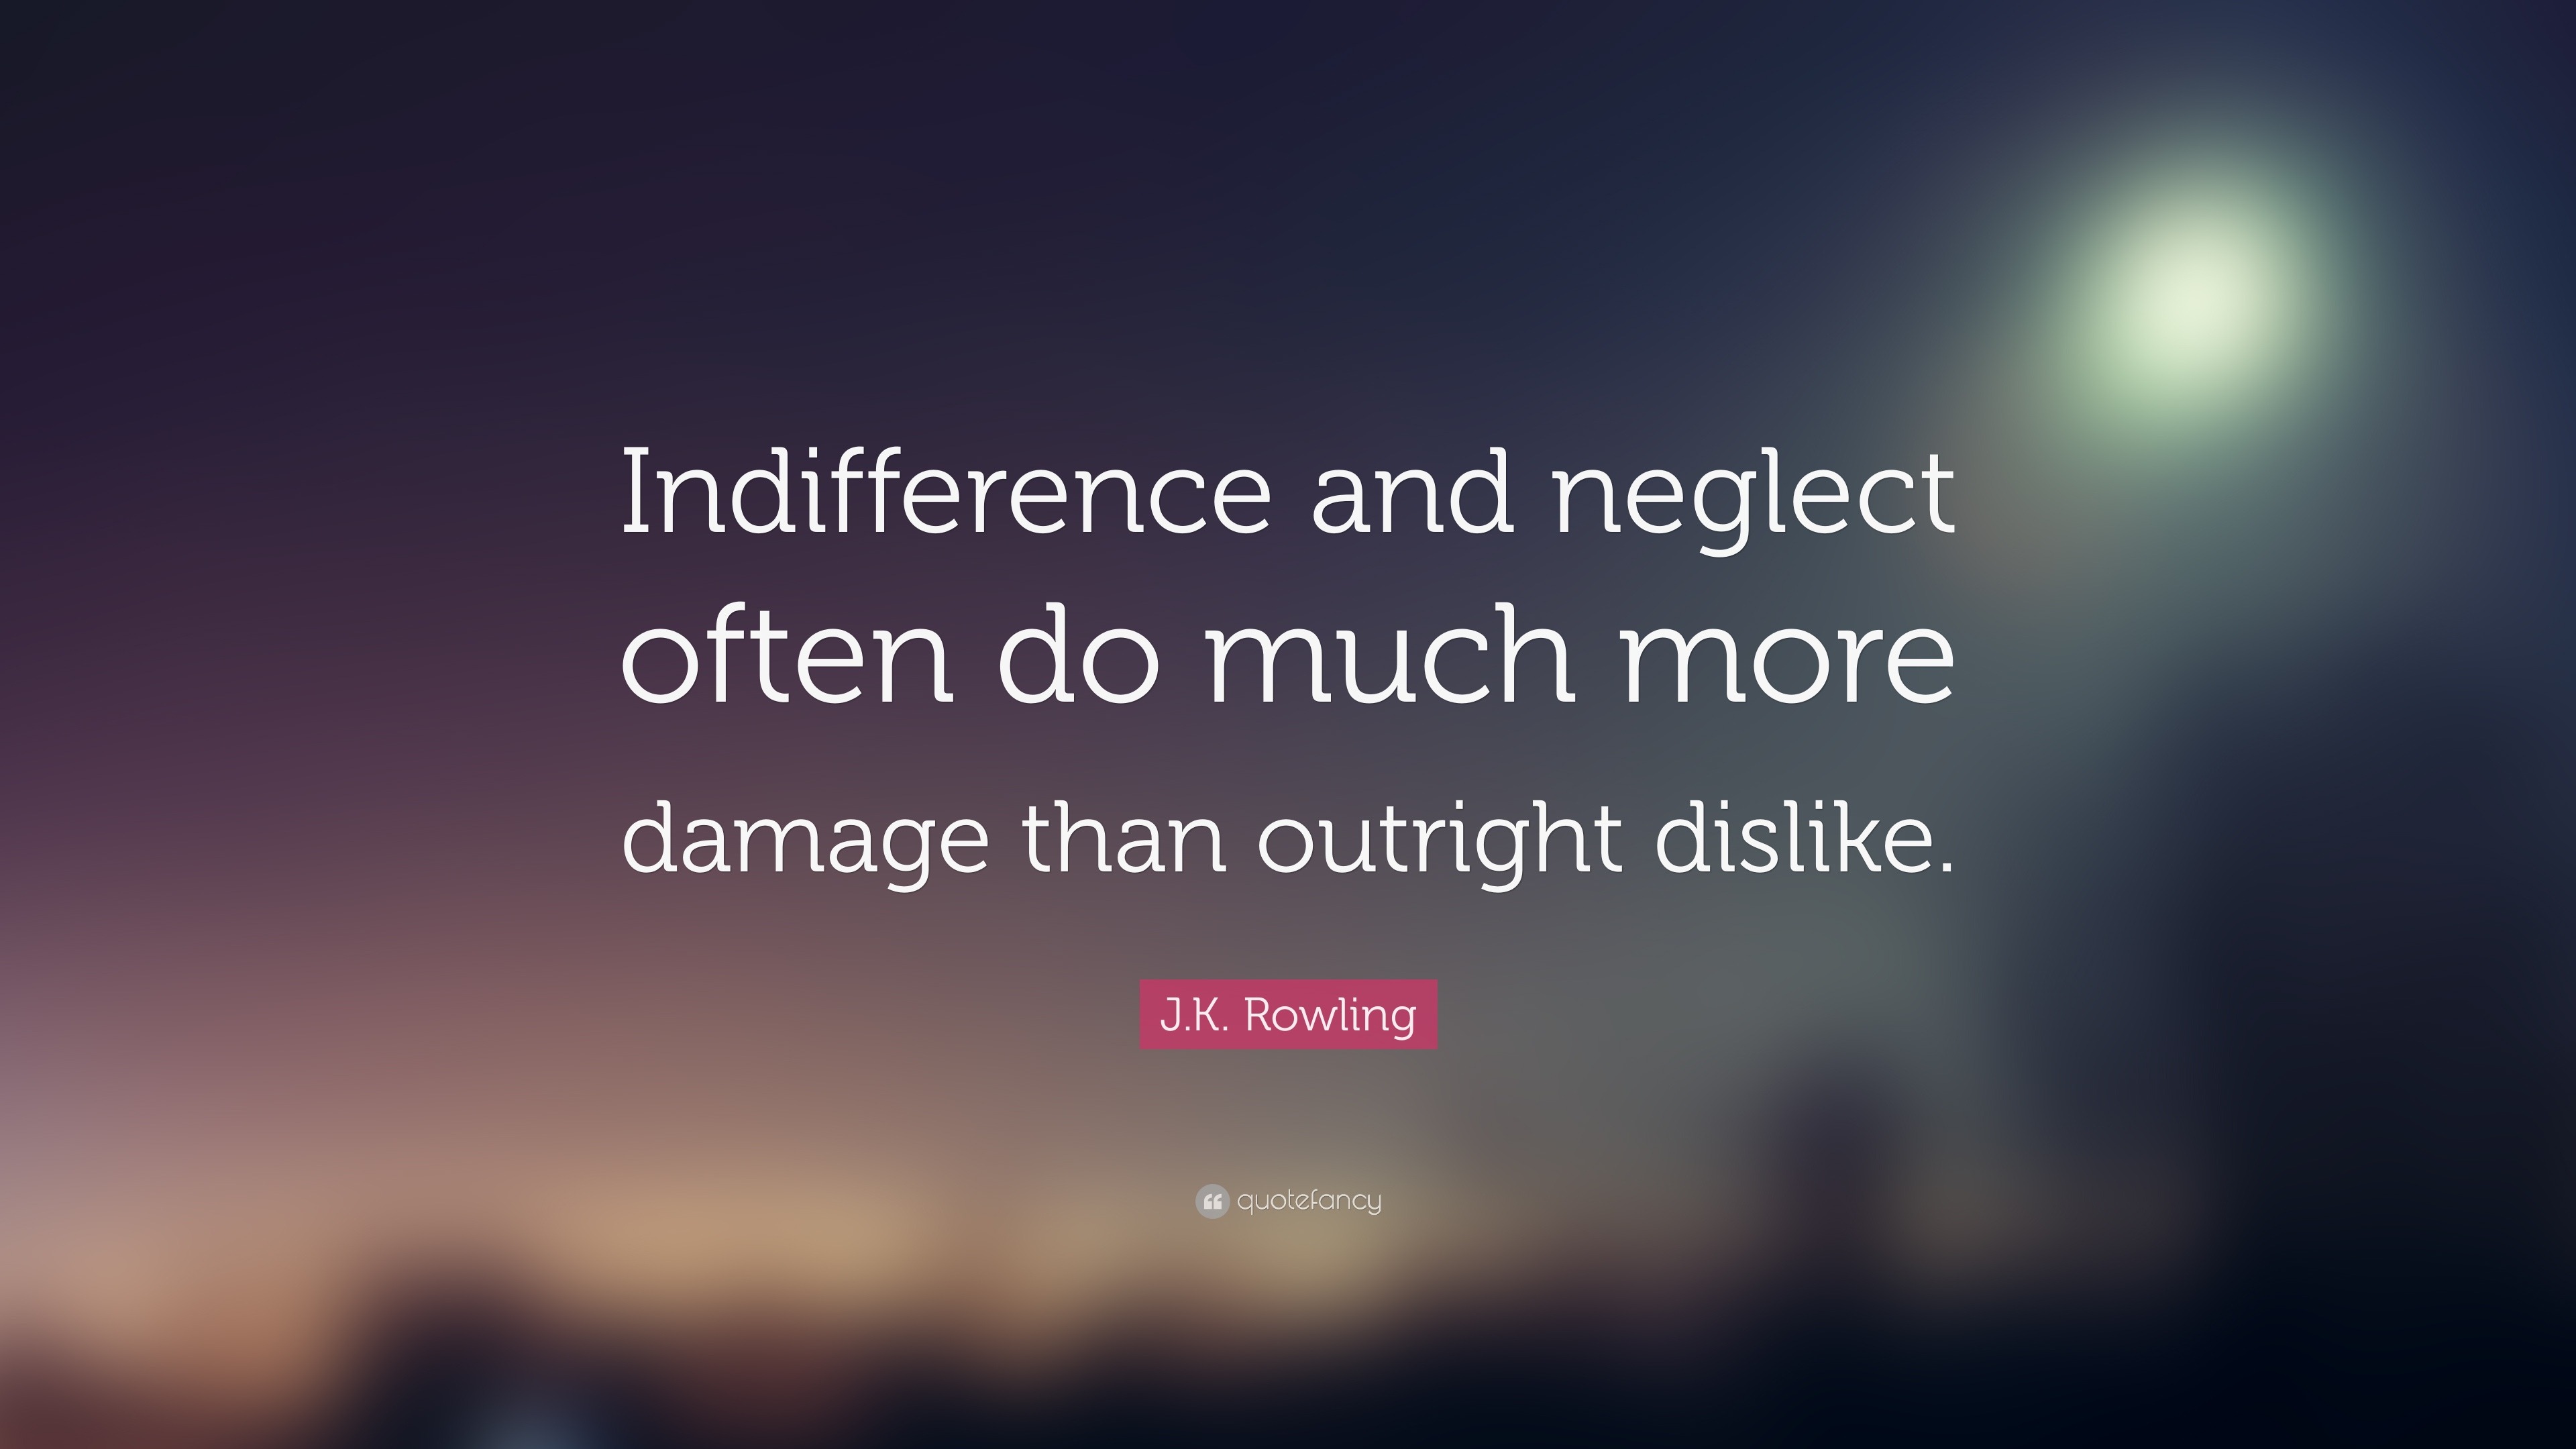 J.K. Rowling Quote: "Indifference and neglect often do much more damage than outright dislike ...